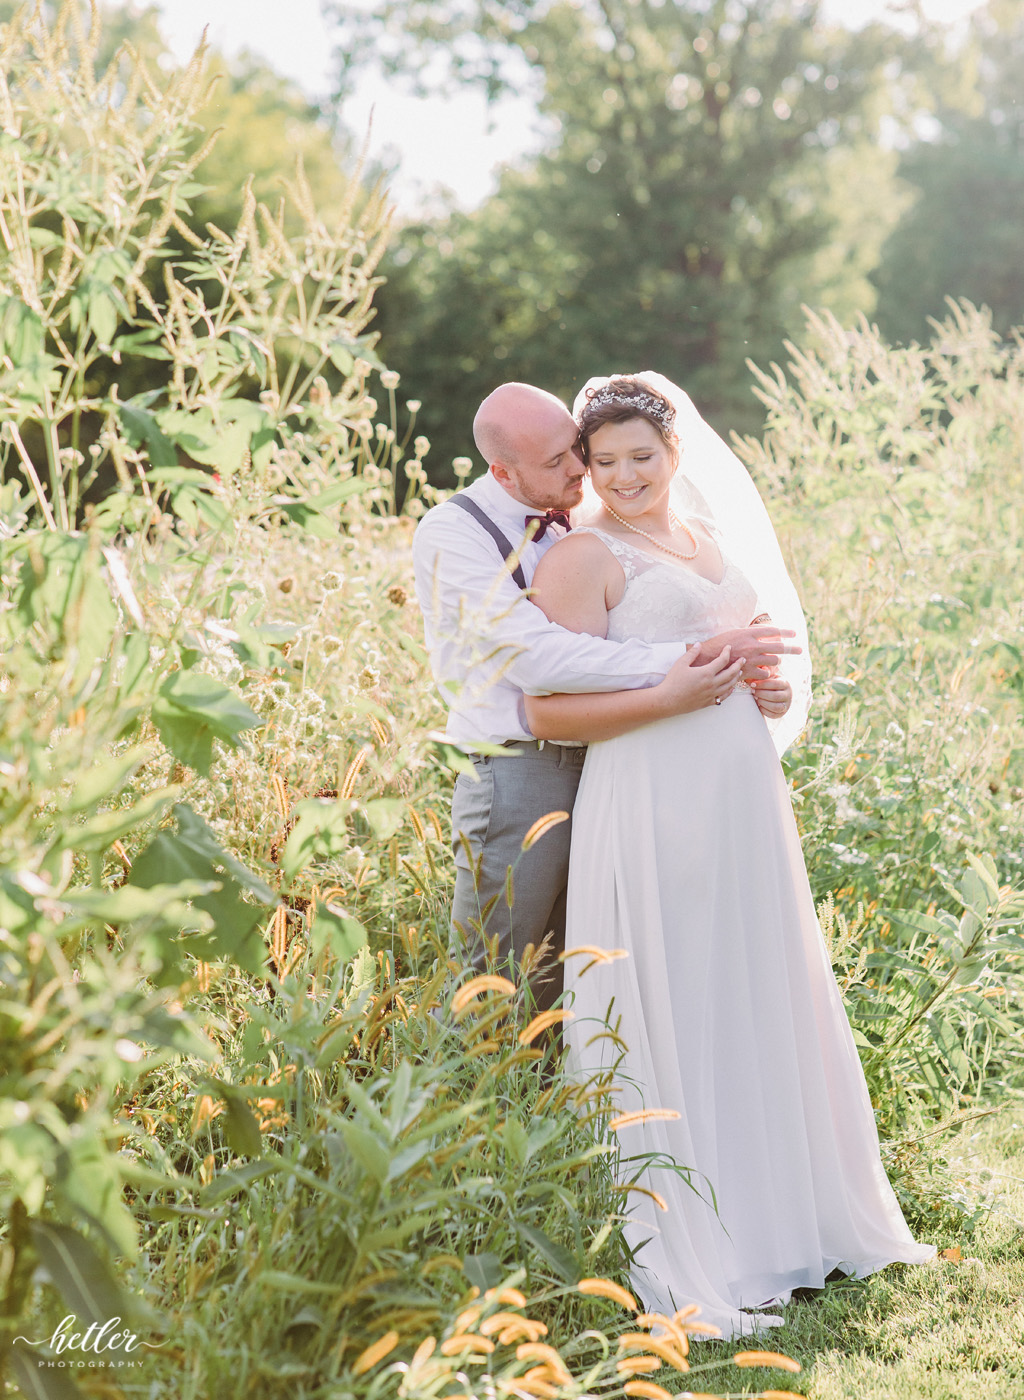 Summer Post Family Farm wedding on a gorgeous August day during Covid